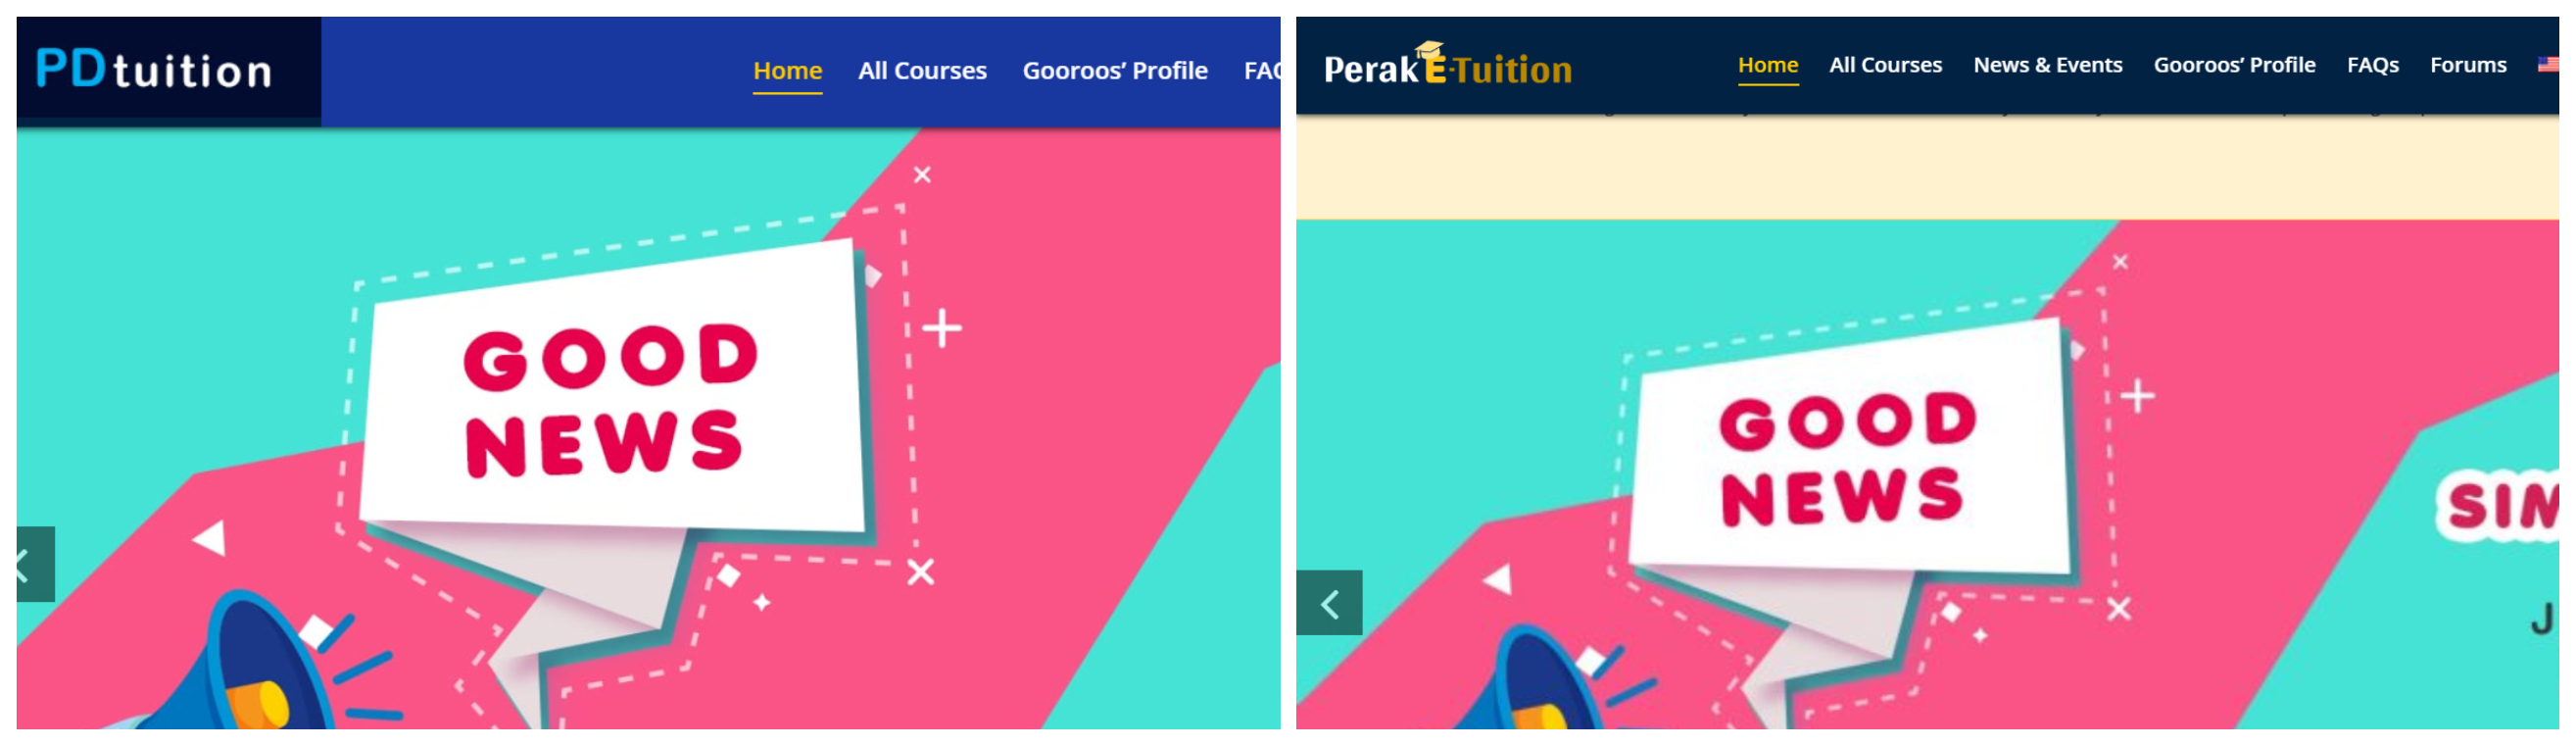 Screengrab from PD Tuition and Perak eTuition